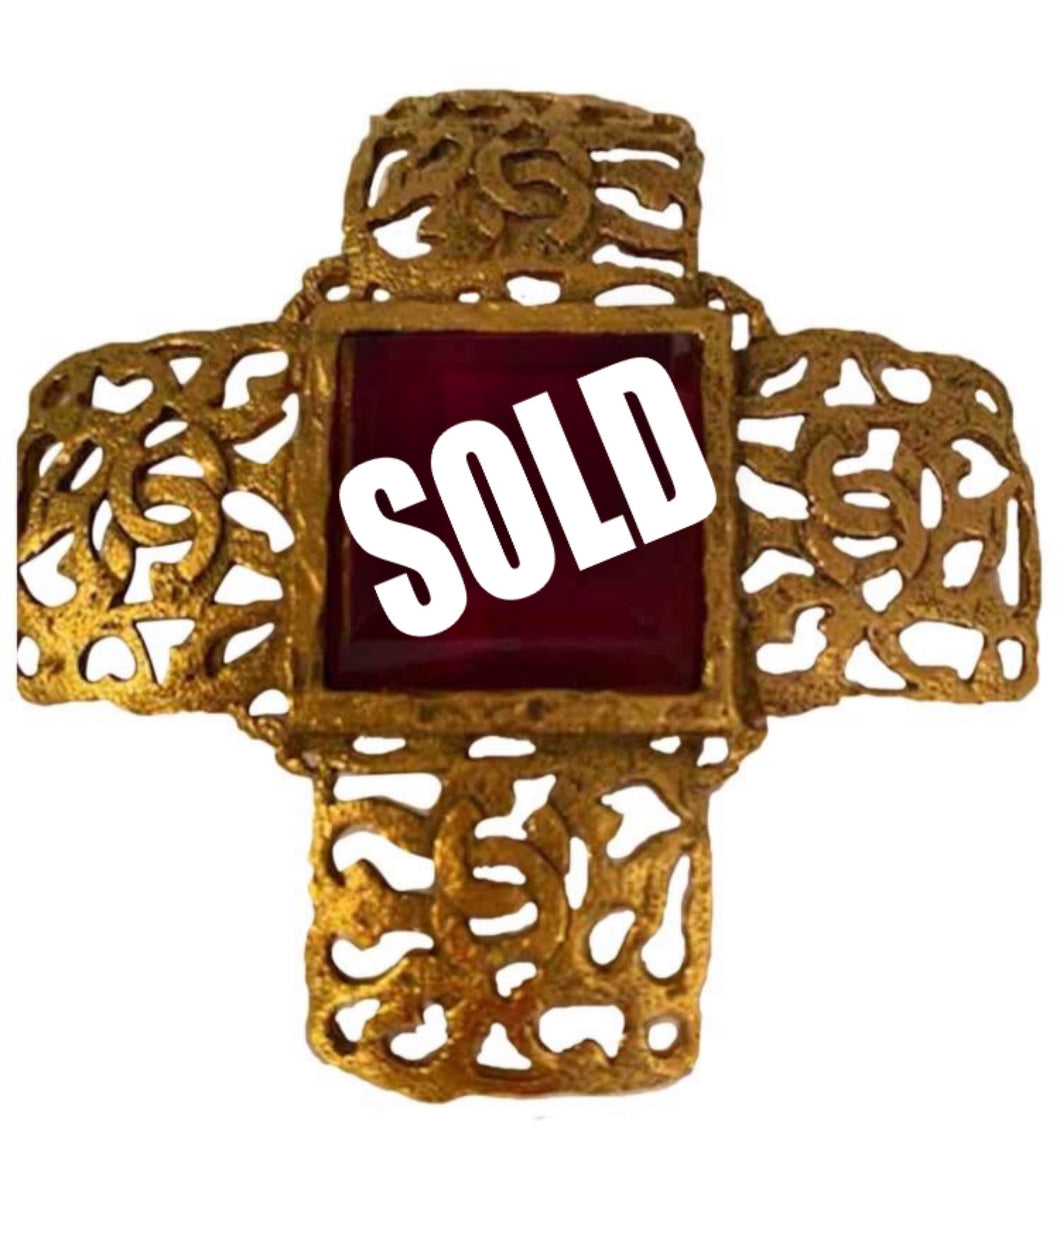 1980’s Collection 25 Vintage Chanel Gold Cross Brooch Pin